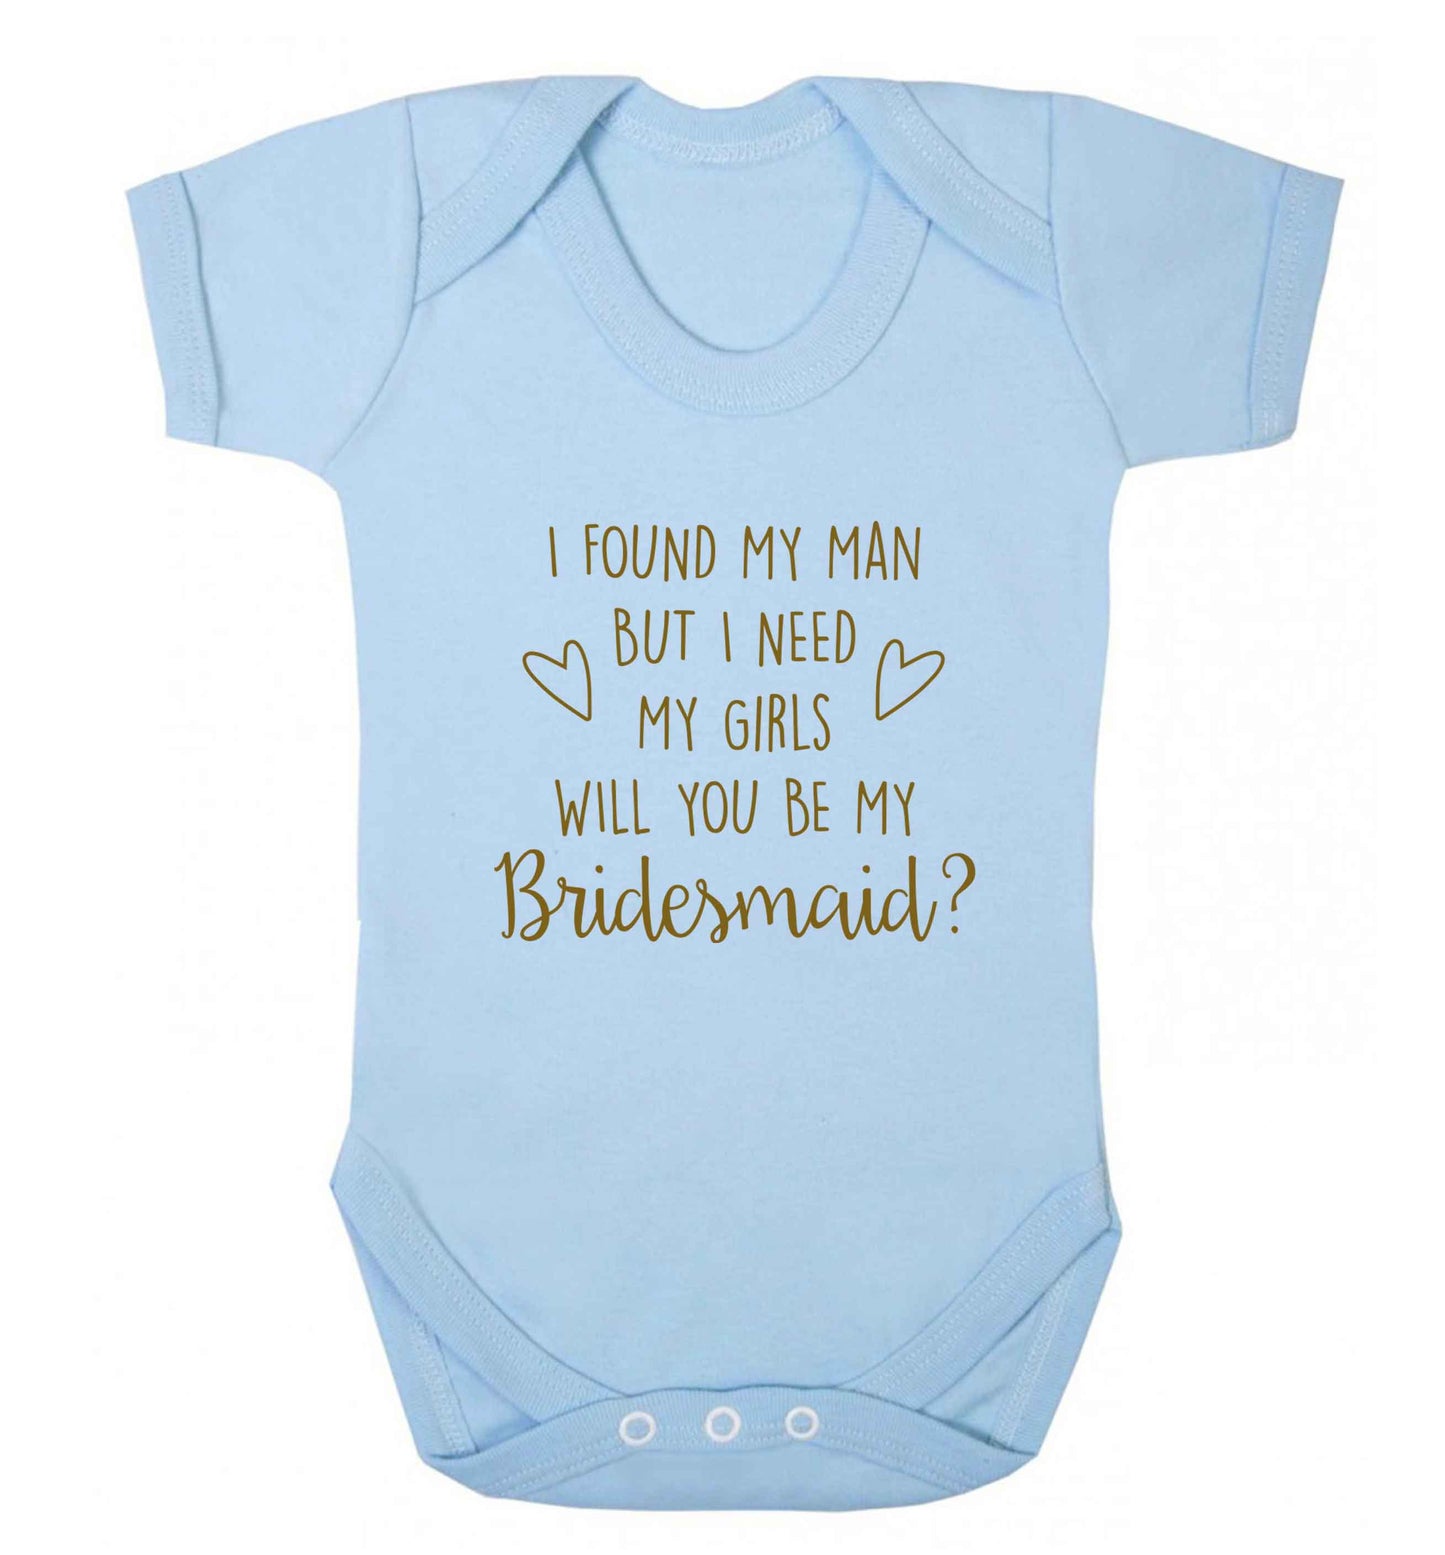 I found my man but I need my girls will you be my bridesmaid? baby vest pale blue 18-24 months